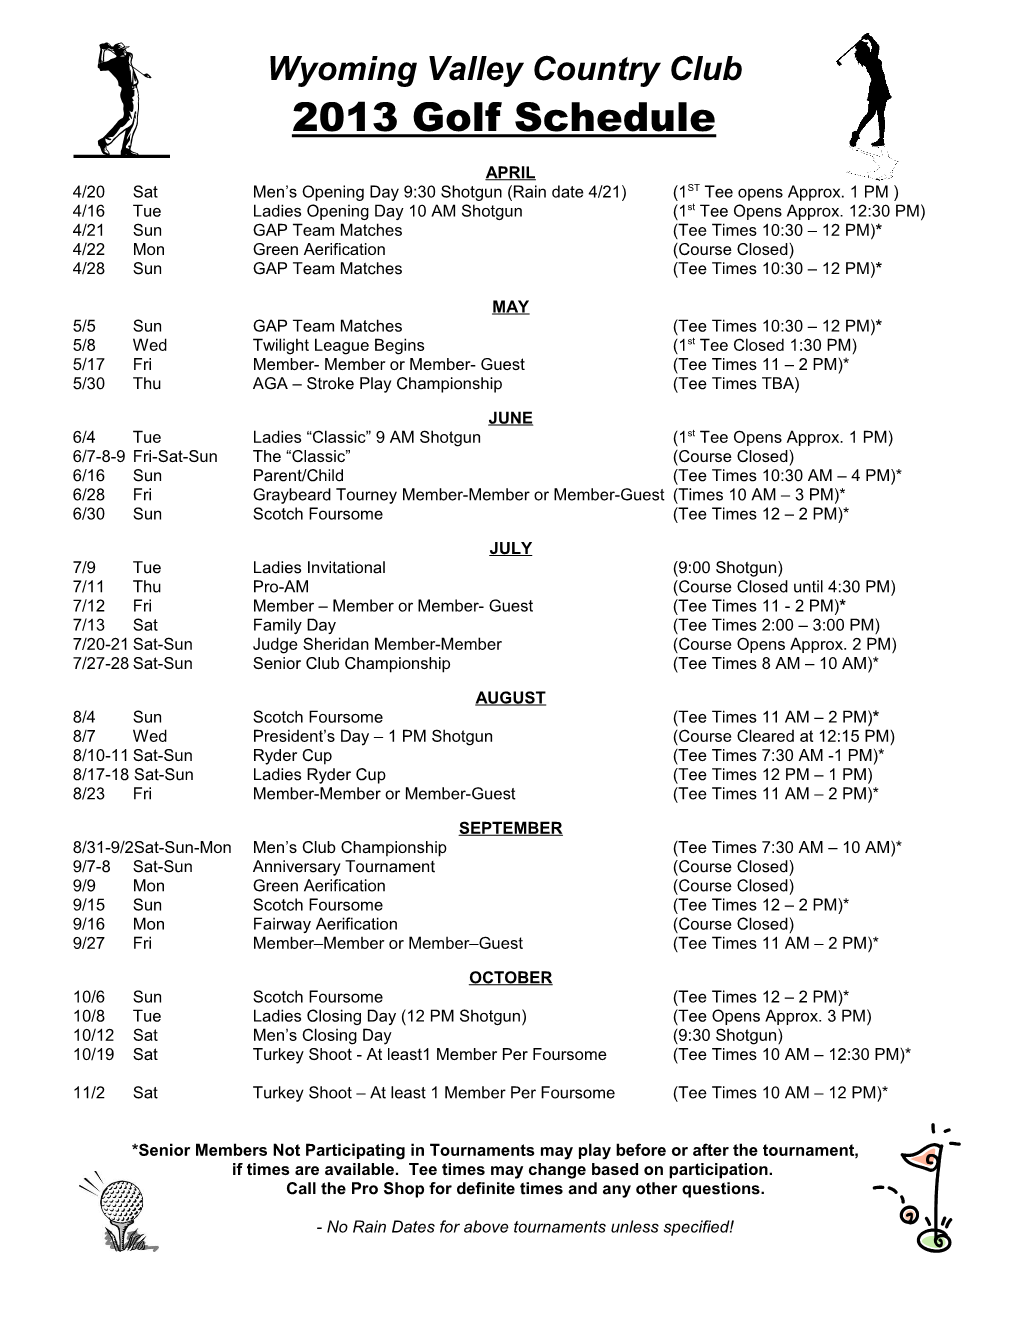 Wyoming Valley Country Club 2003 Golf Schedule